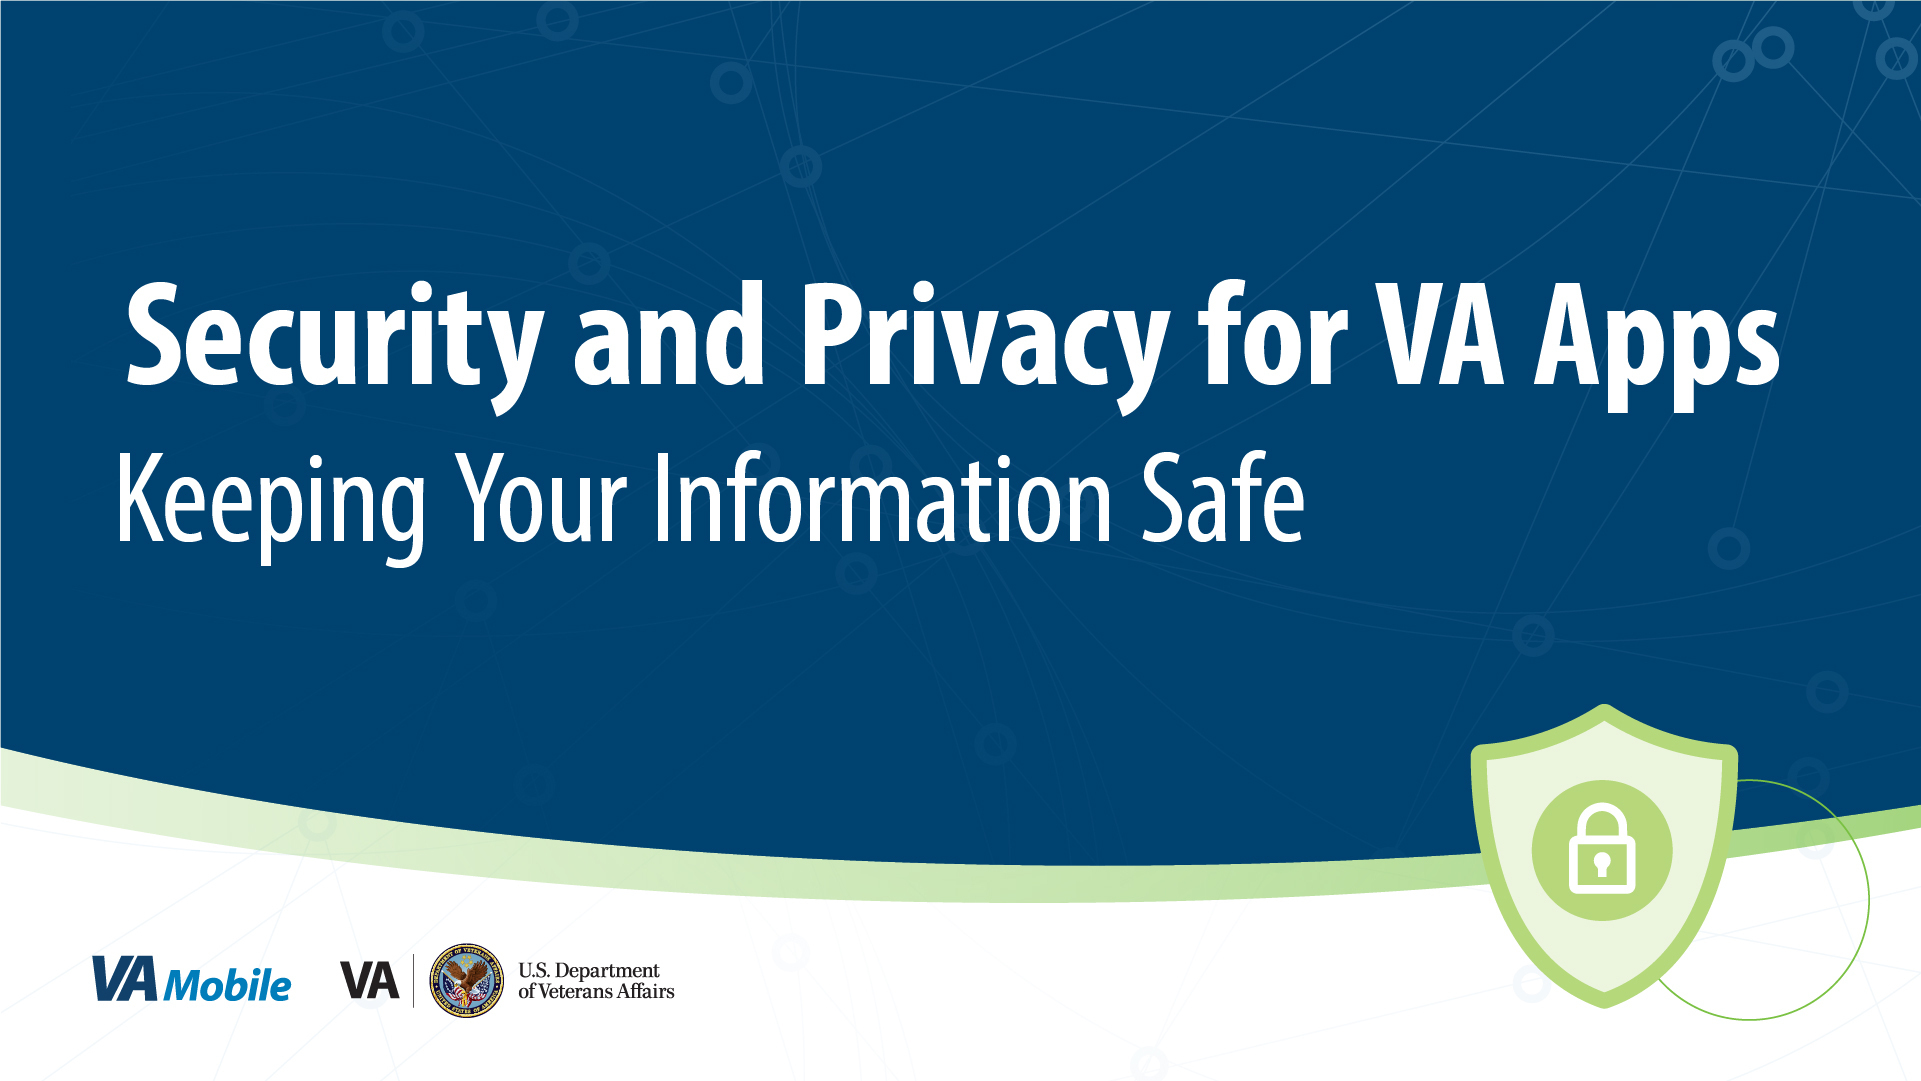 Dark blue background with title in white text "Security and Privacy for VA Apps"